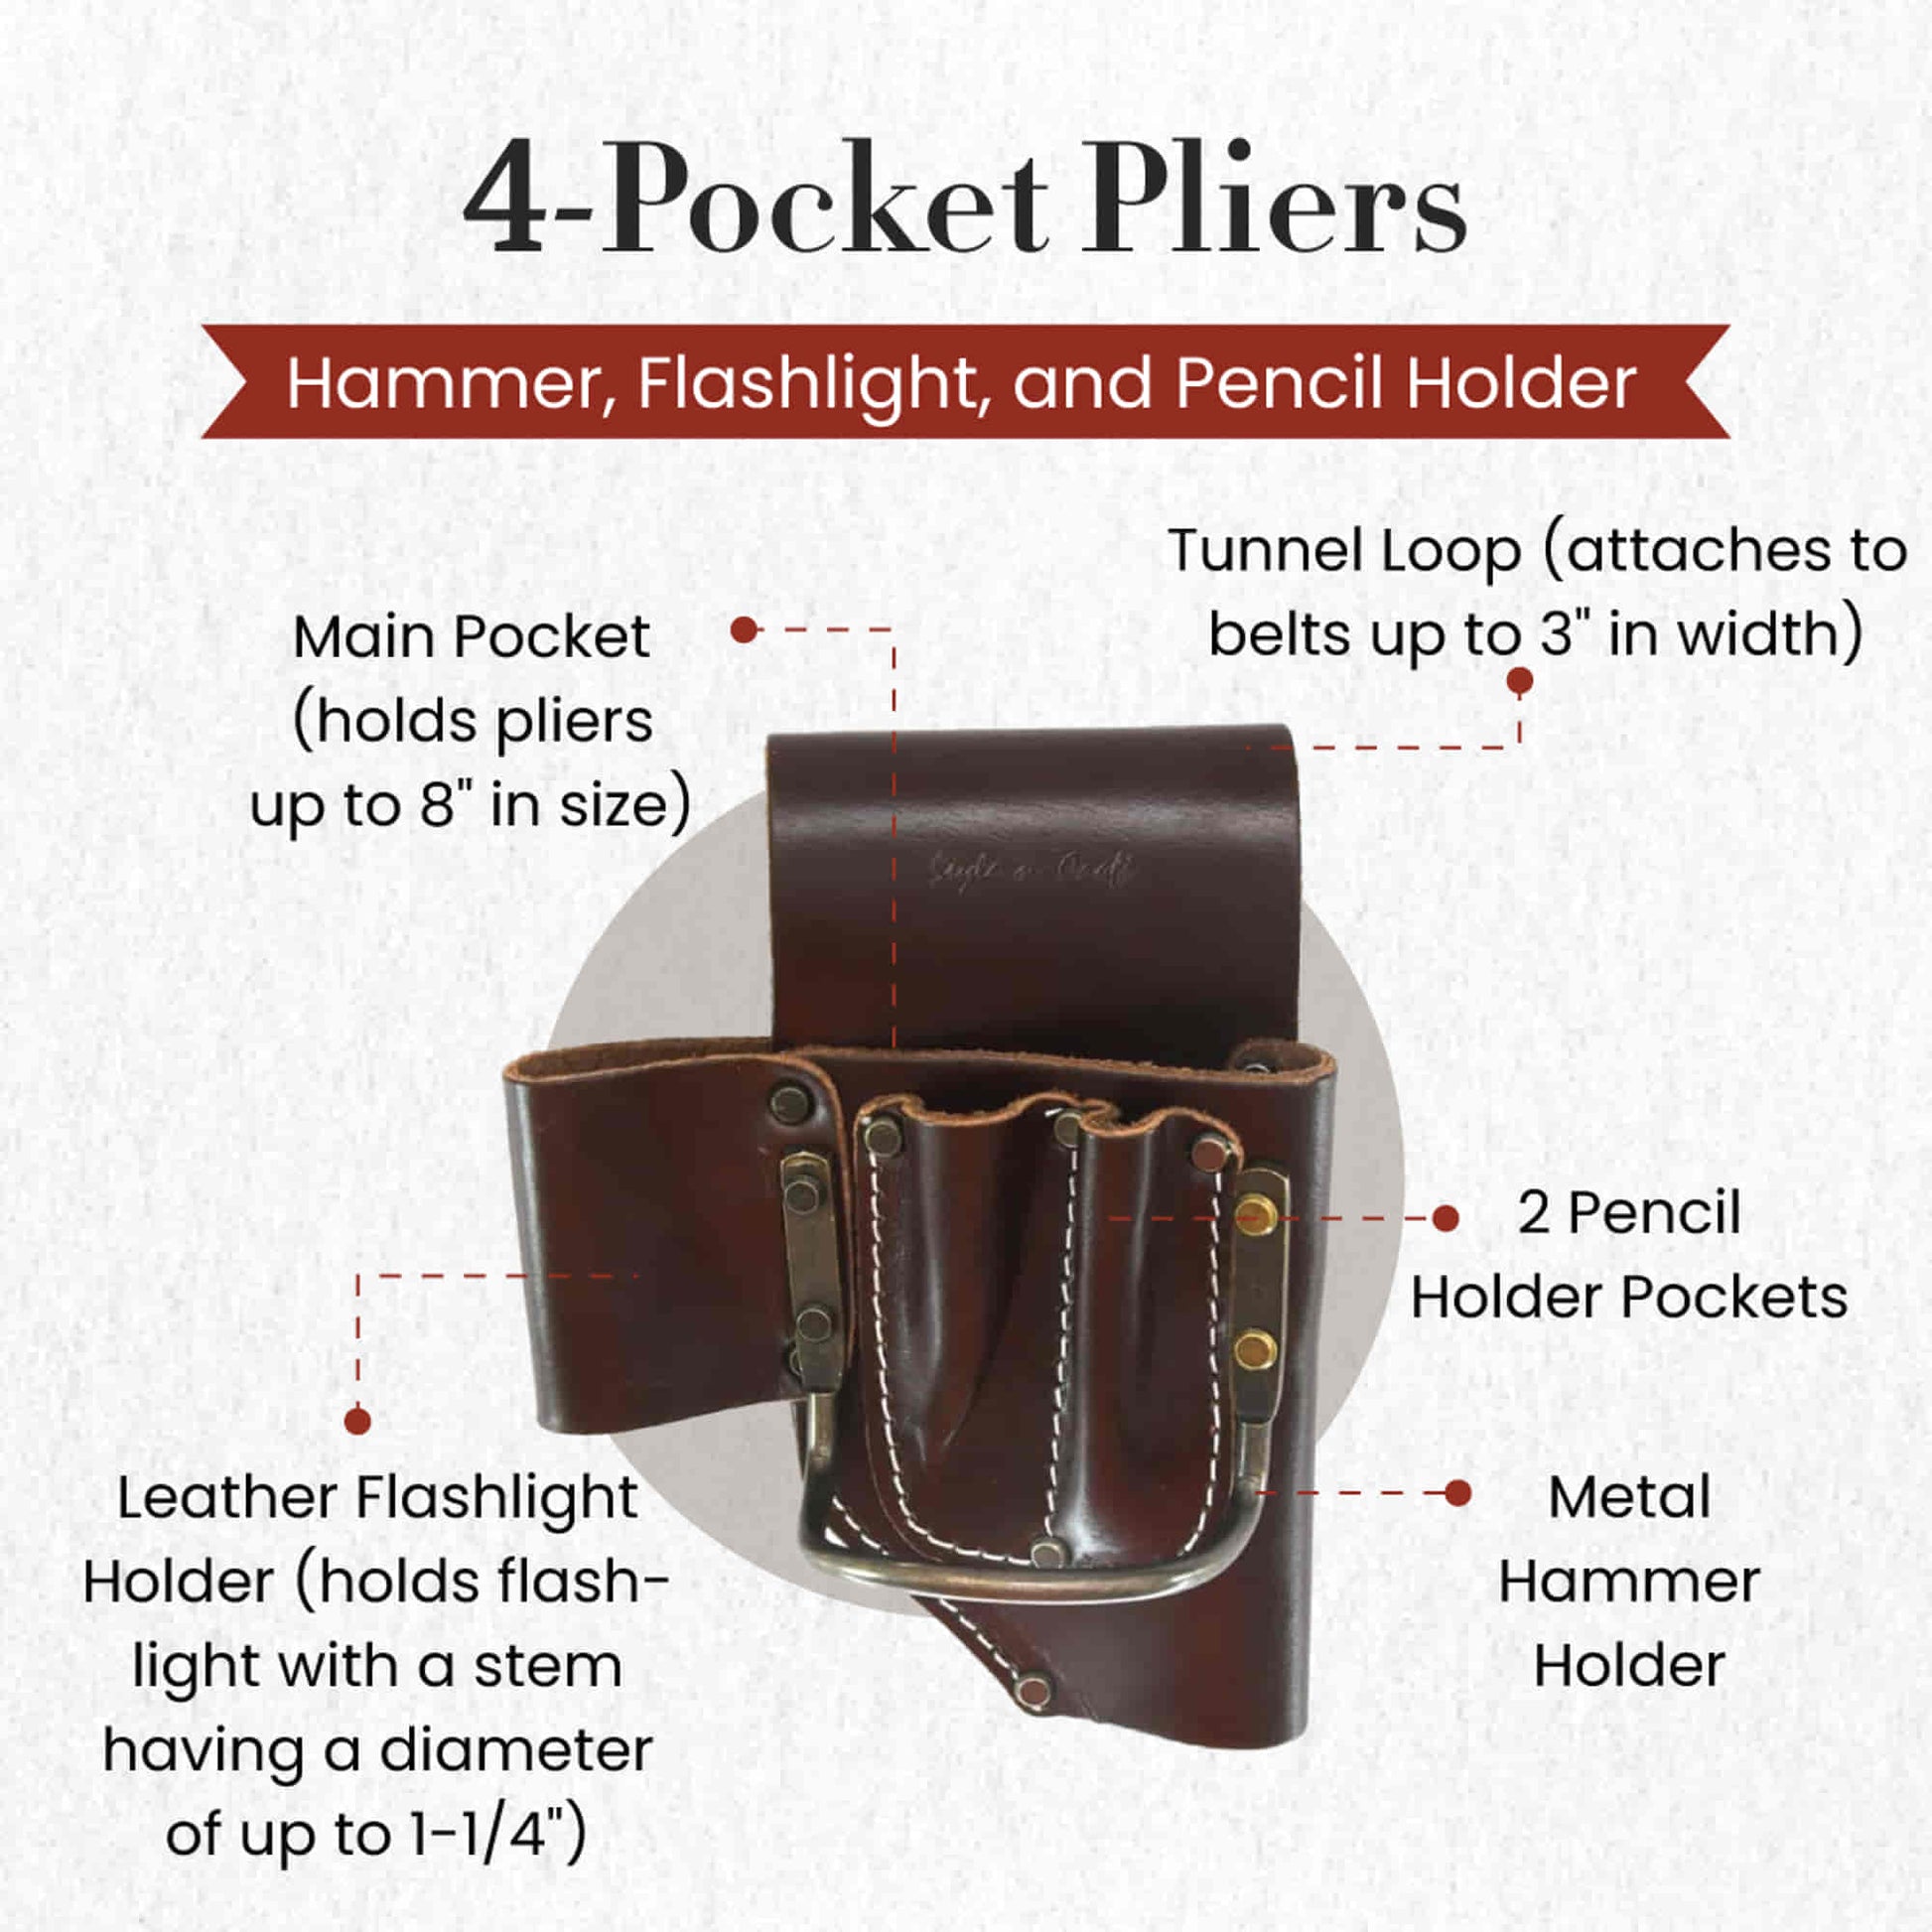 Style n Craft's 98460 - 4 Pocket Pliers, hammer, Flashlight & Pencil Holder in Heavy Dark Tan Full Grain Leather with a Tunnel Loop that fits a belt up to 3 inches wide - Front View Showing the Details